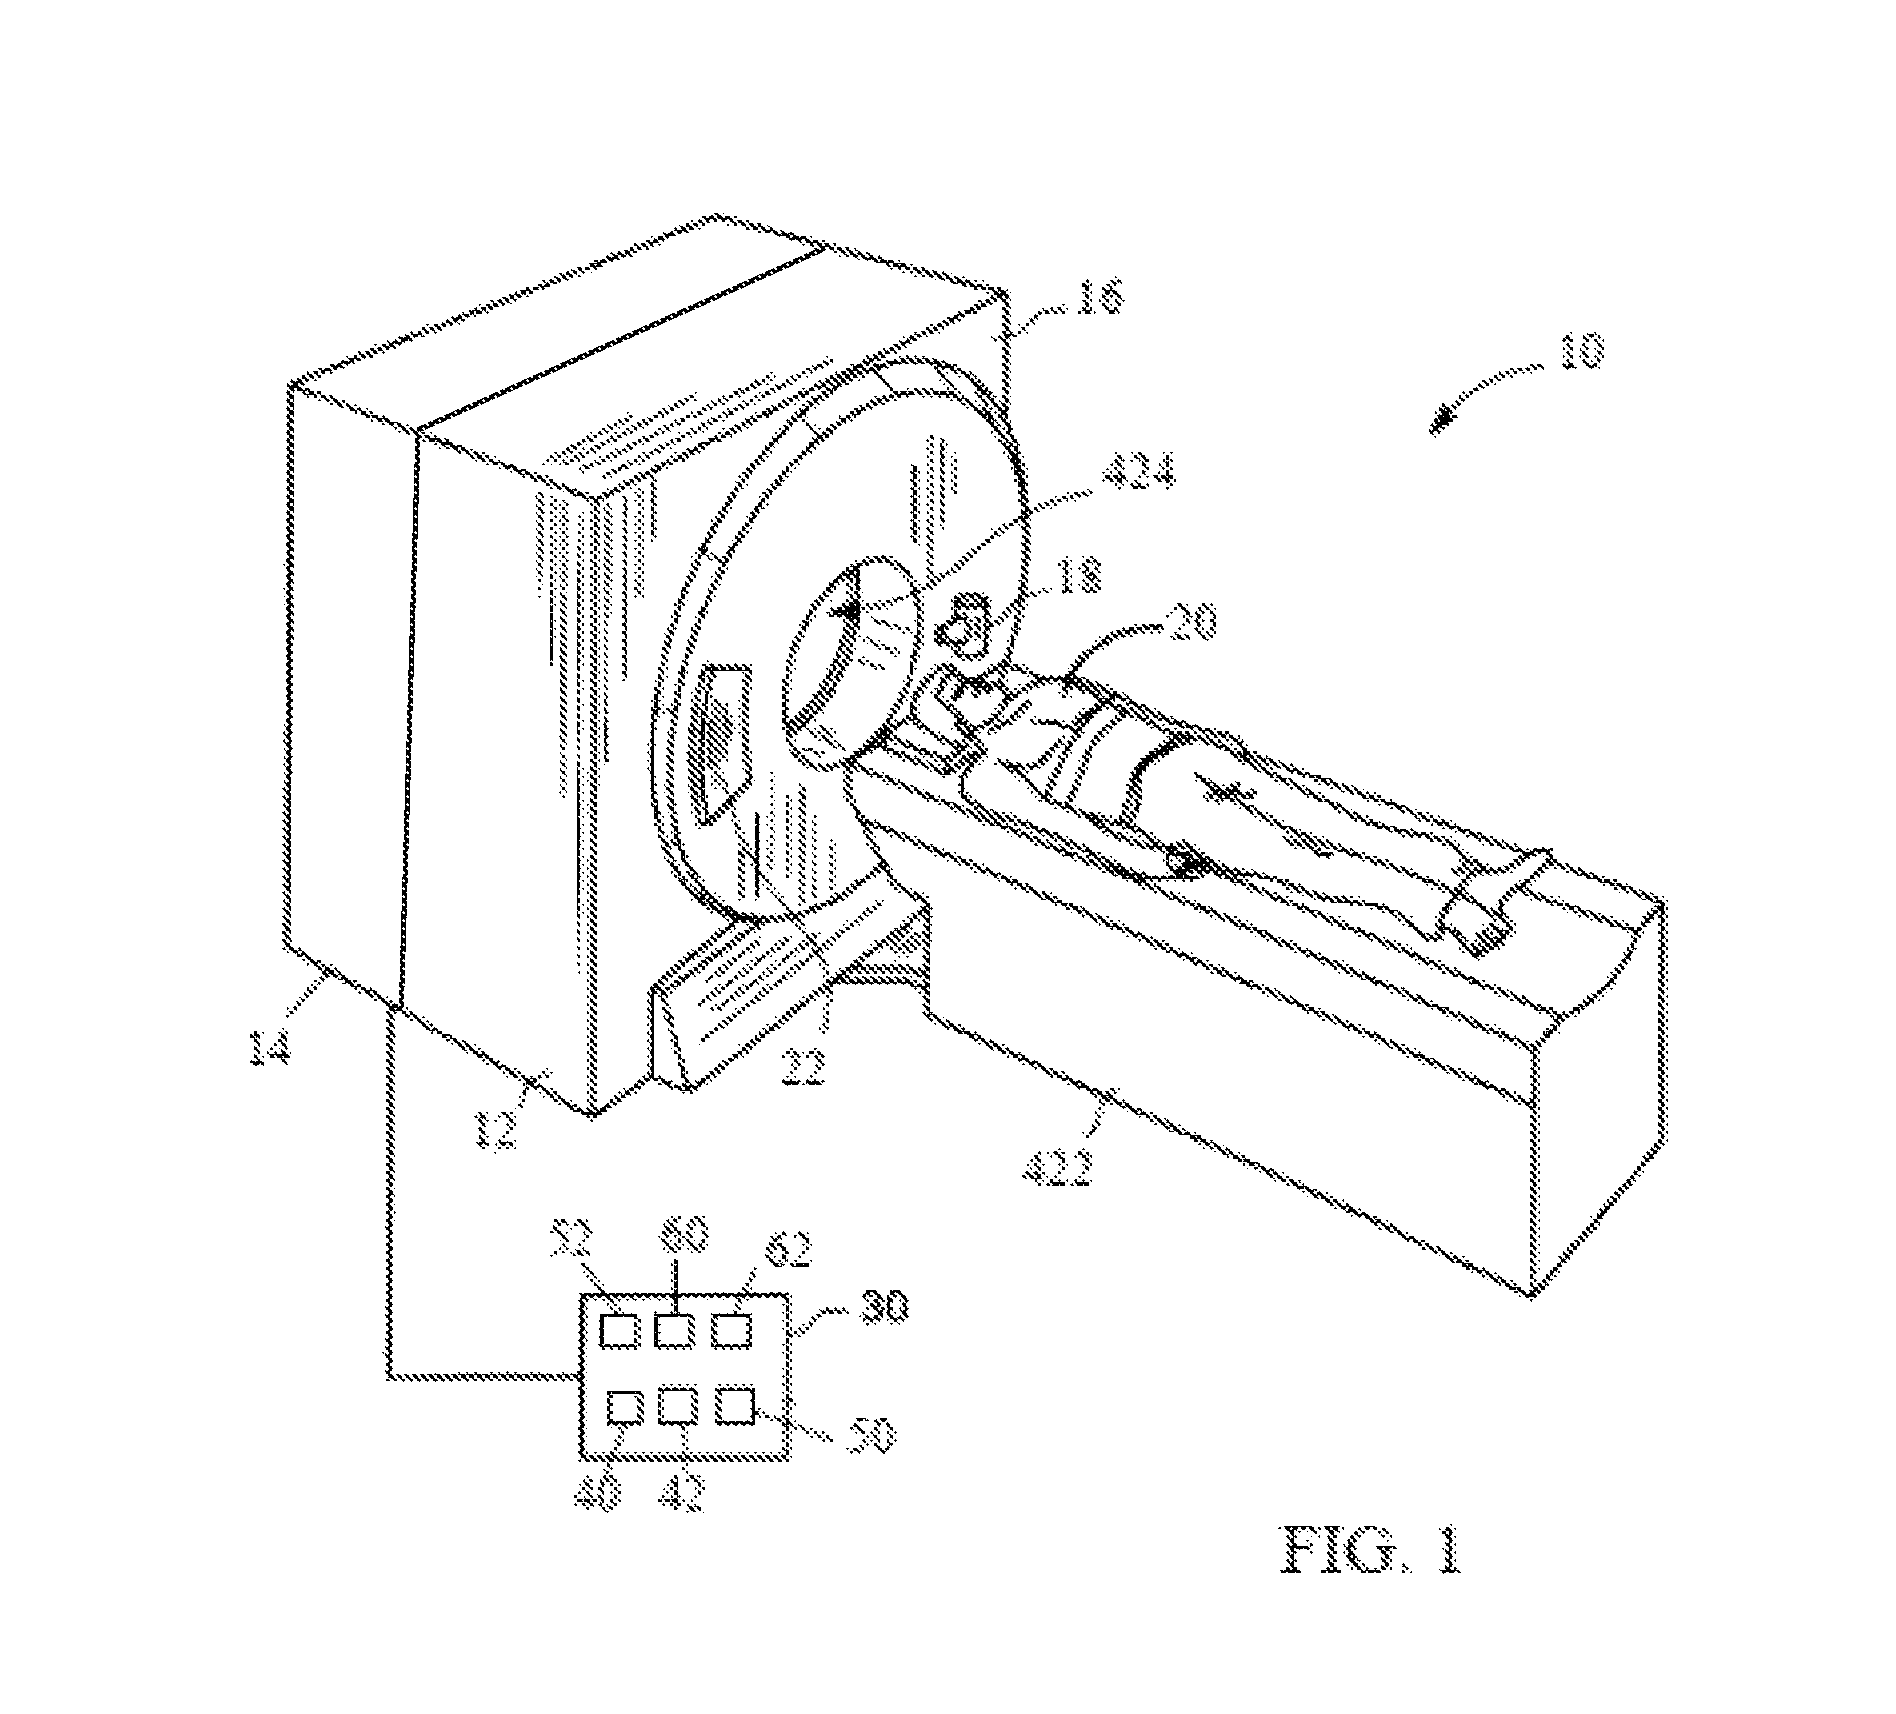 Method and apparatus for reducing motion related imaging artifacts using consistency values